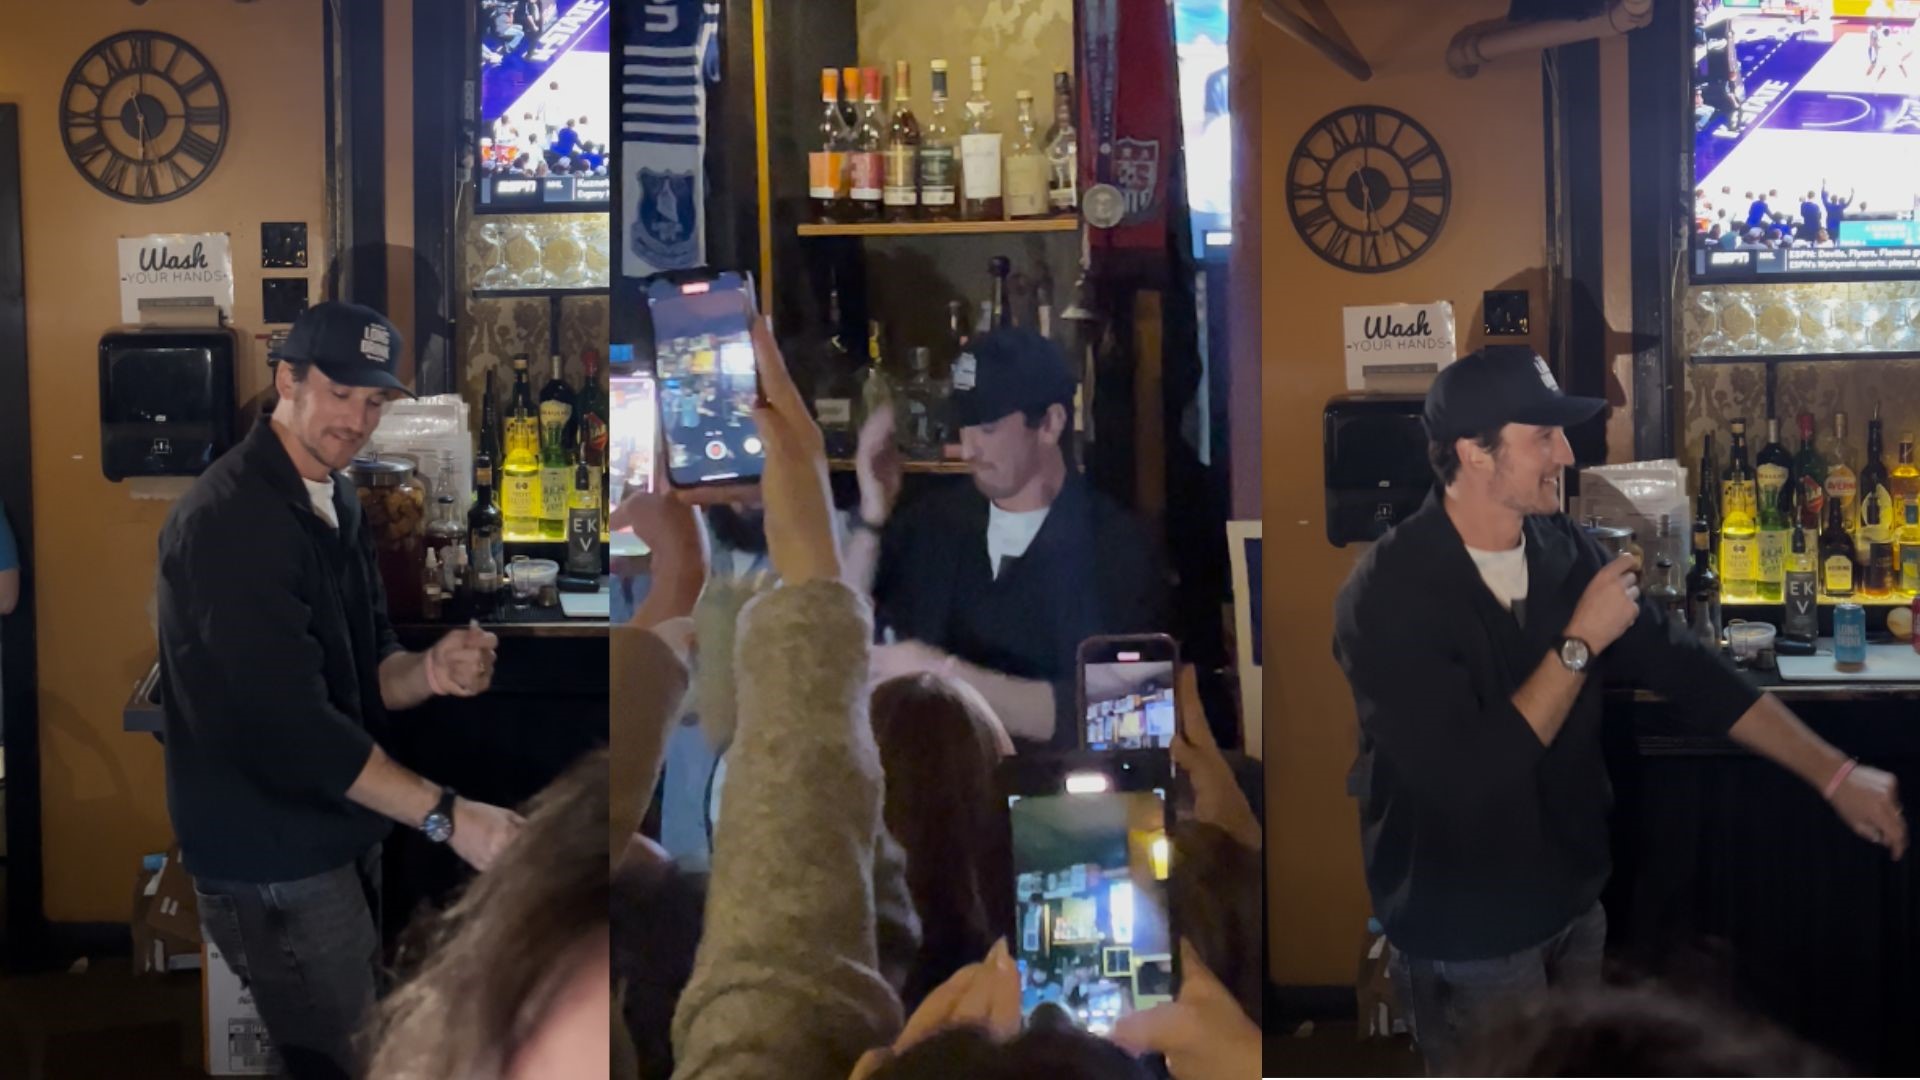 The a-list movie star danced to the iconic Top Gun song, spurring a now-viral Tik Tok filmed at SpeakEZ in Grand Rapids.